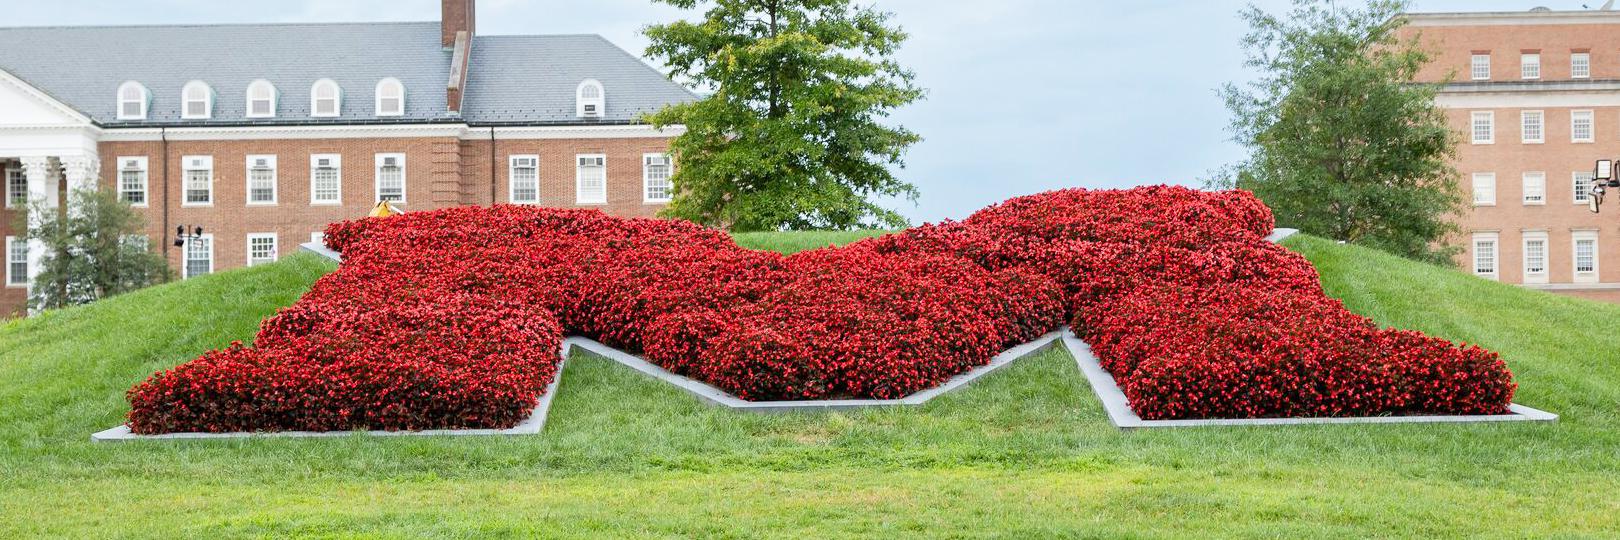 A bed of flowers with red flowers in the shape of an M with a building in the background.